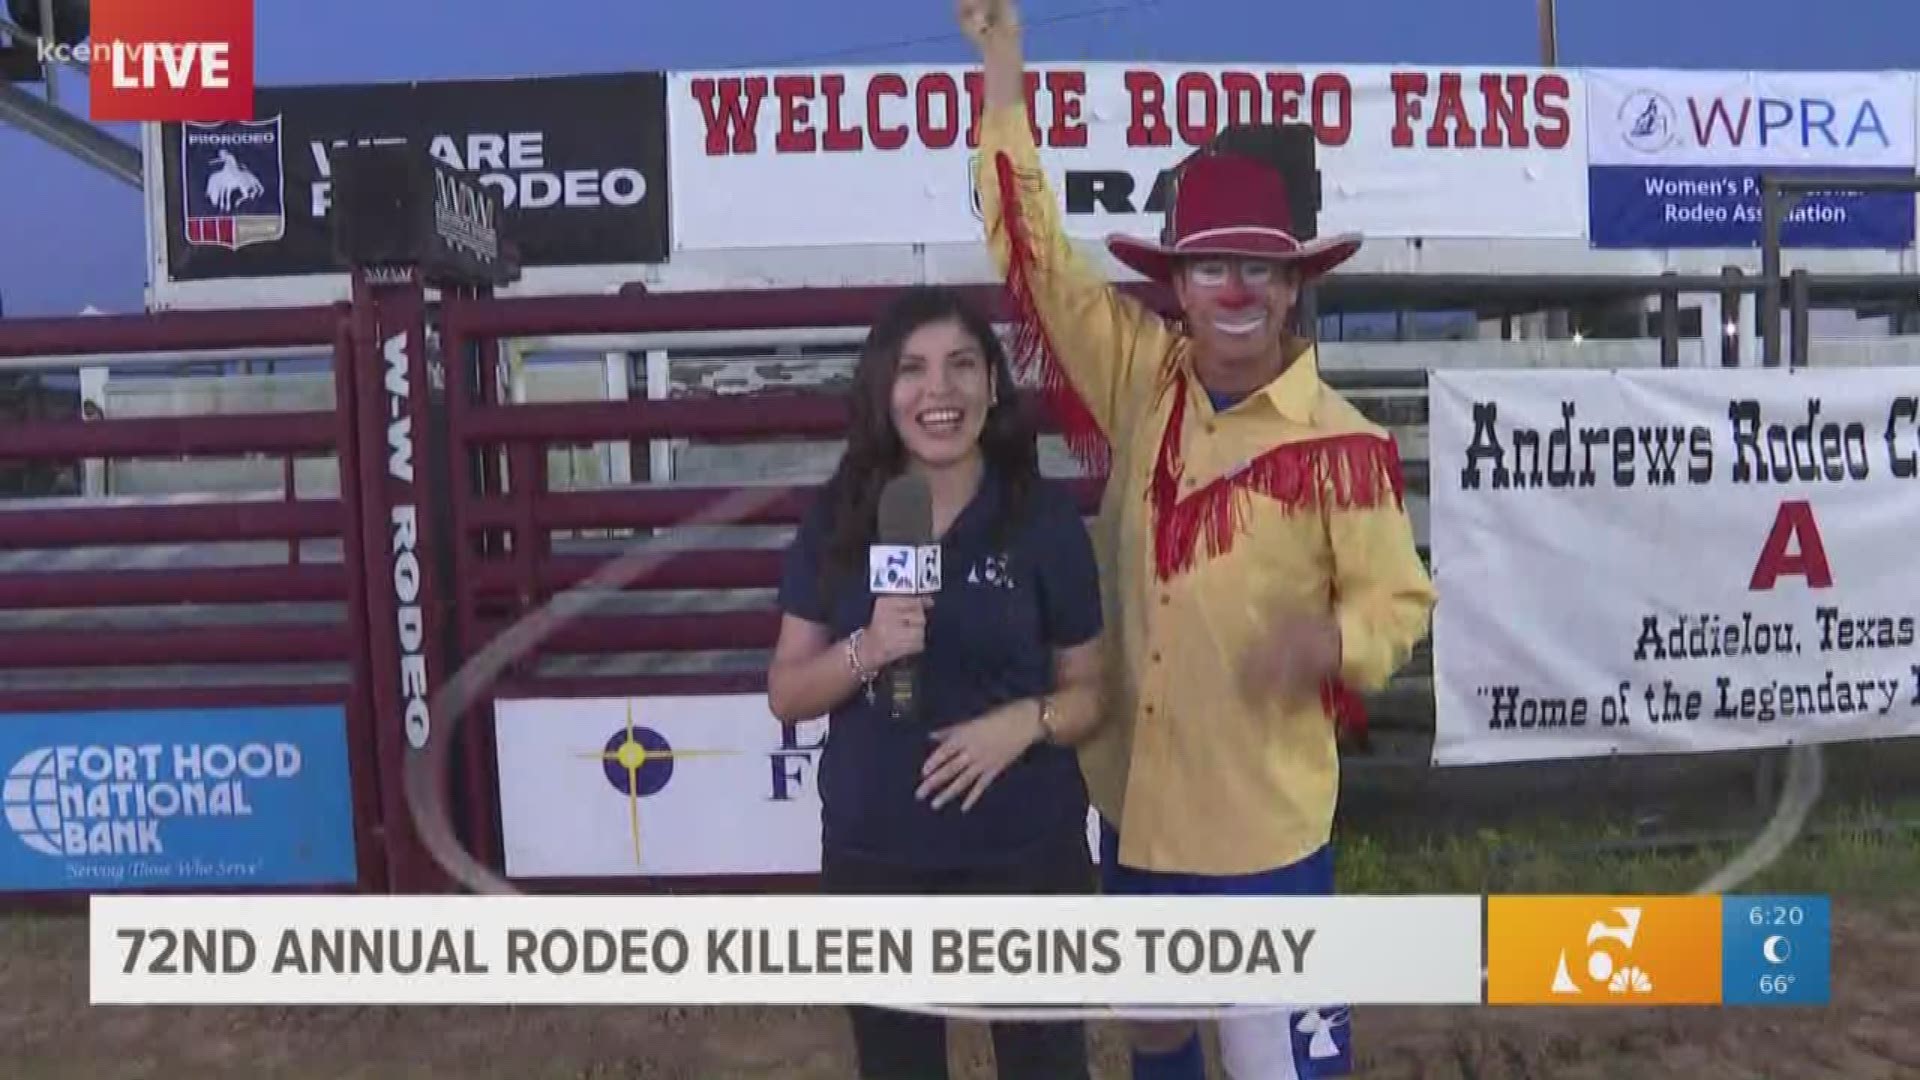 The 72nd annual Rodeo Killeen kicks off Thursday with military appreciation night. The rodeo is set to take place from May 16 to 18.